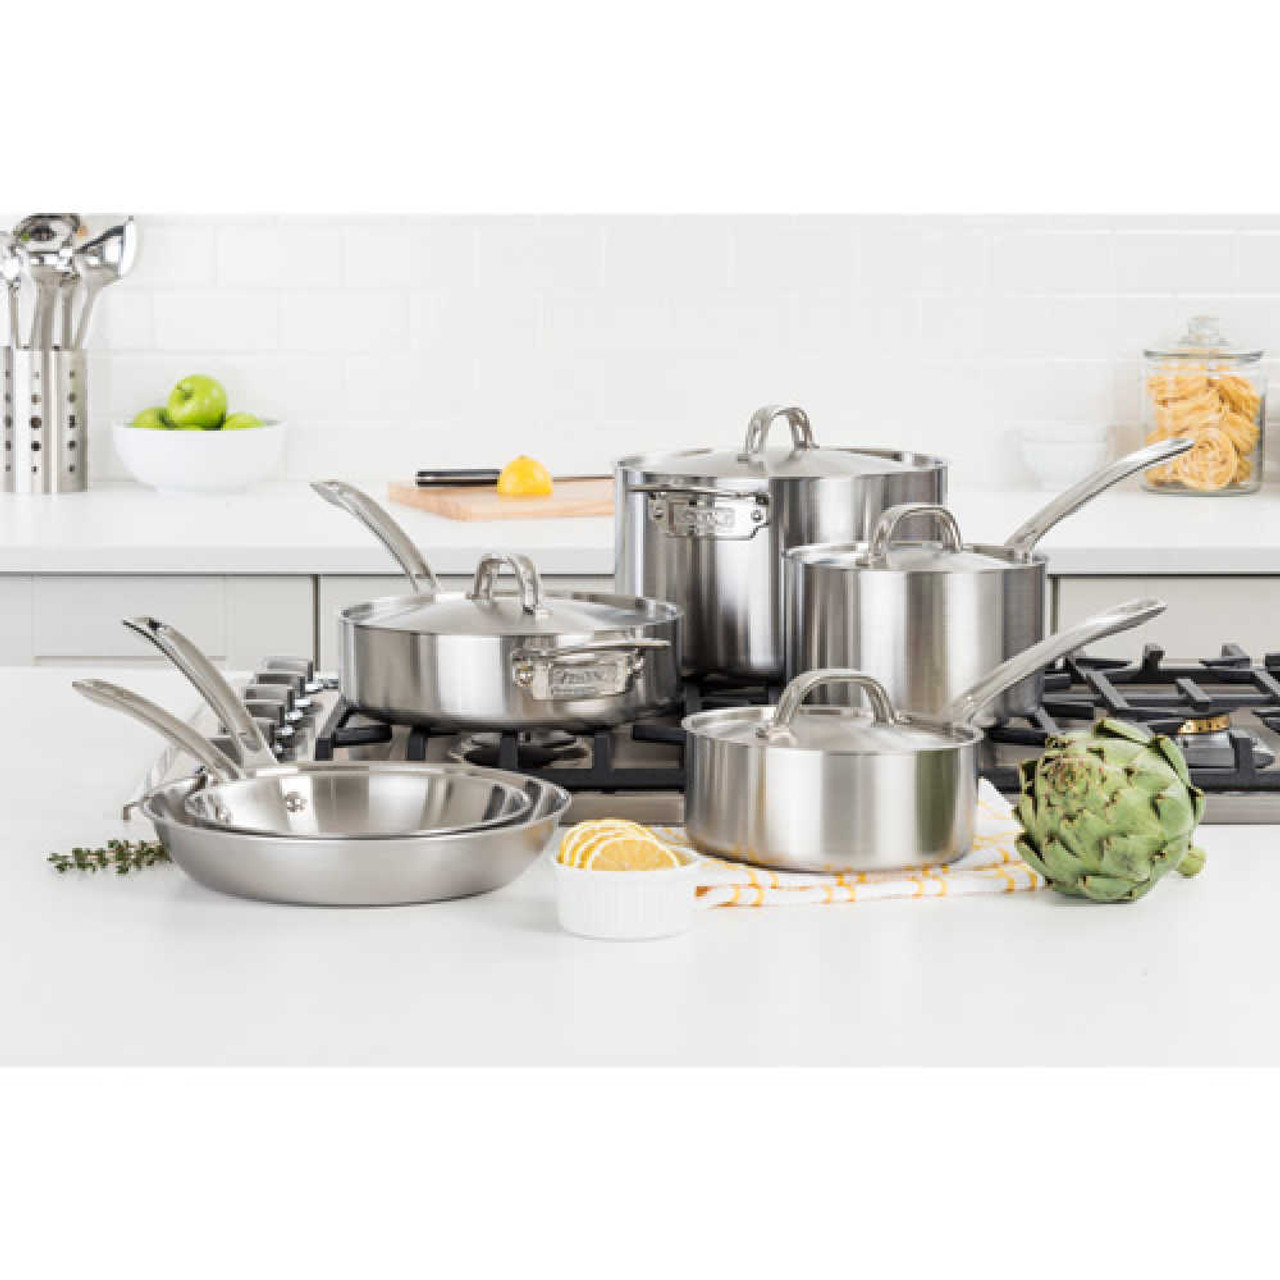 https://cdn11.bigcommerce.com/s-hccytny0od/images/stencil/1280x1280/products/4811/19738/Viking_Professional_5-Ply_10-Piece_Cookware_Set_1__44105.1656112091.jpg?c=2?imbypass=on